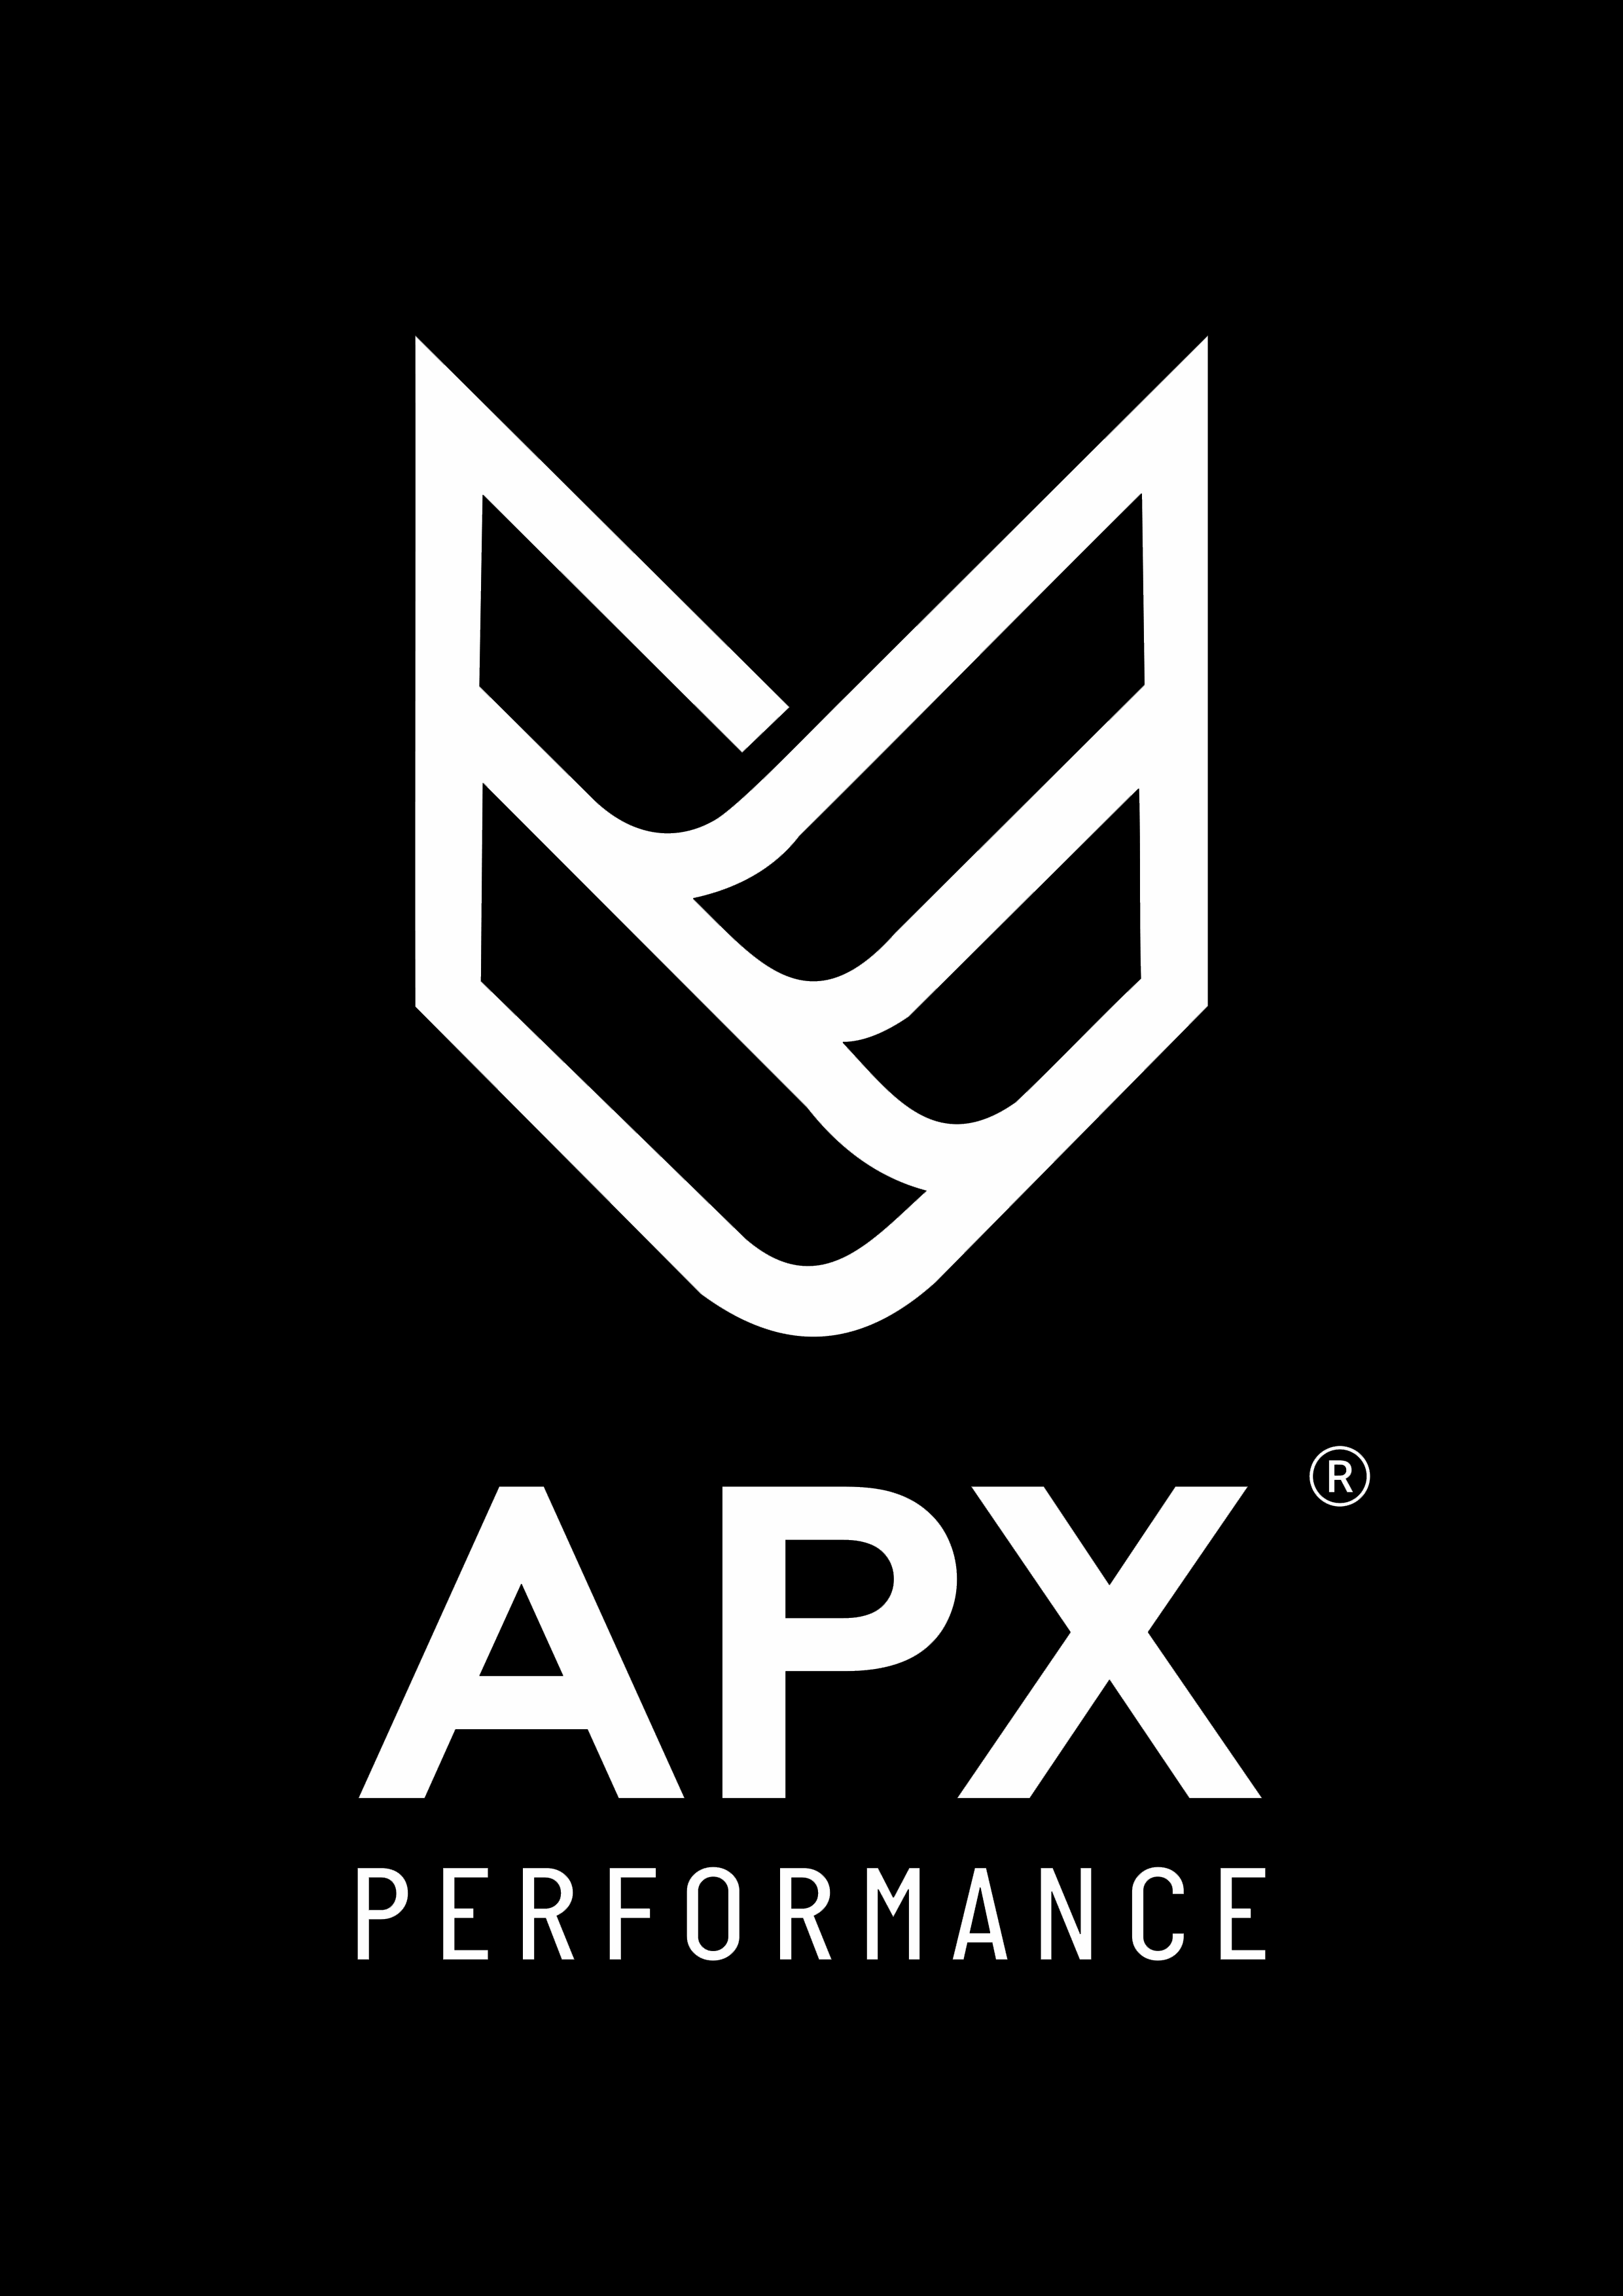 APX-Performance are proud partners of London Skolars Rugby League’s Official Online Store